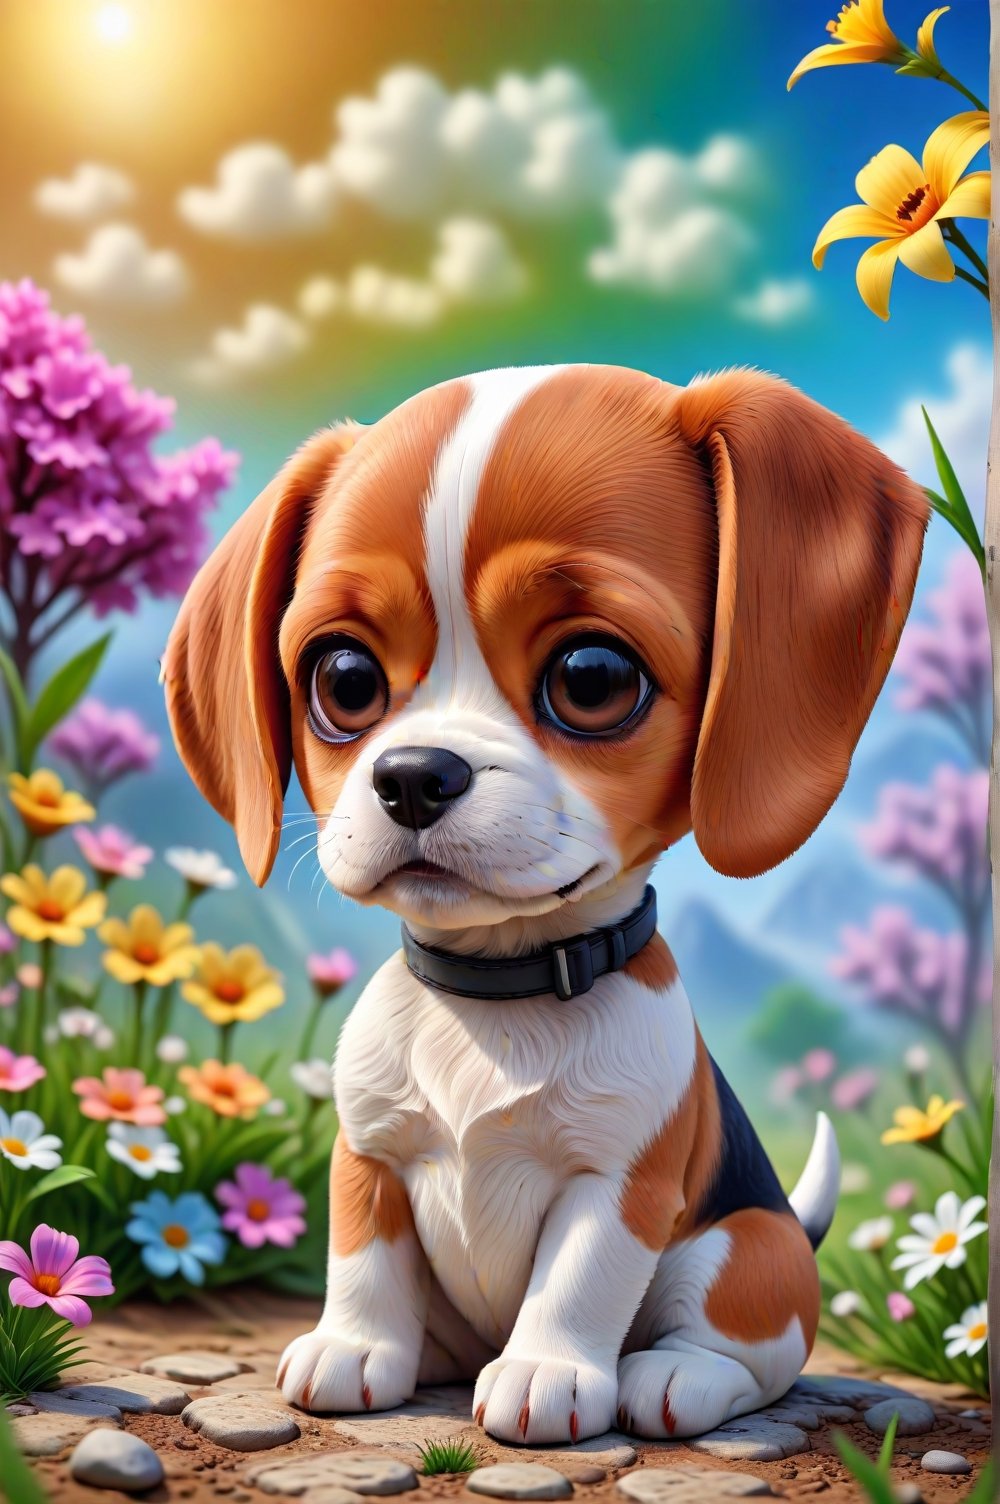 There is a little dog (Beagle race) sitting in a funny pose,  beautiful digital painting,  cute digital art,  cute little dog,  cute detailed digital art,  adorable and cute,  very cute little dog,  a cute little dog,  beautiful 3D rendering,  cute little dog,  cute and adorable,  visual image of a cute and adorable puppy. Spring weather in the background.,,chibi,,,,<lora:659095807385103906:1.0>,<lora:659095807385103906:1.0>